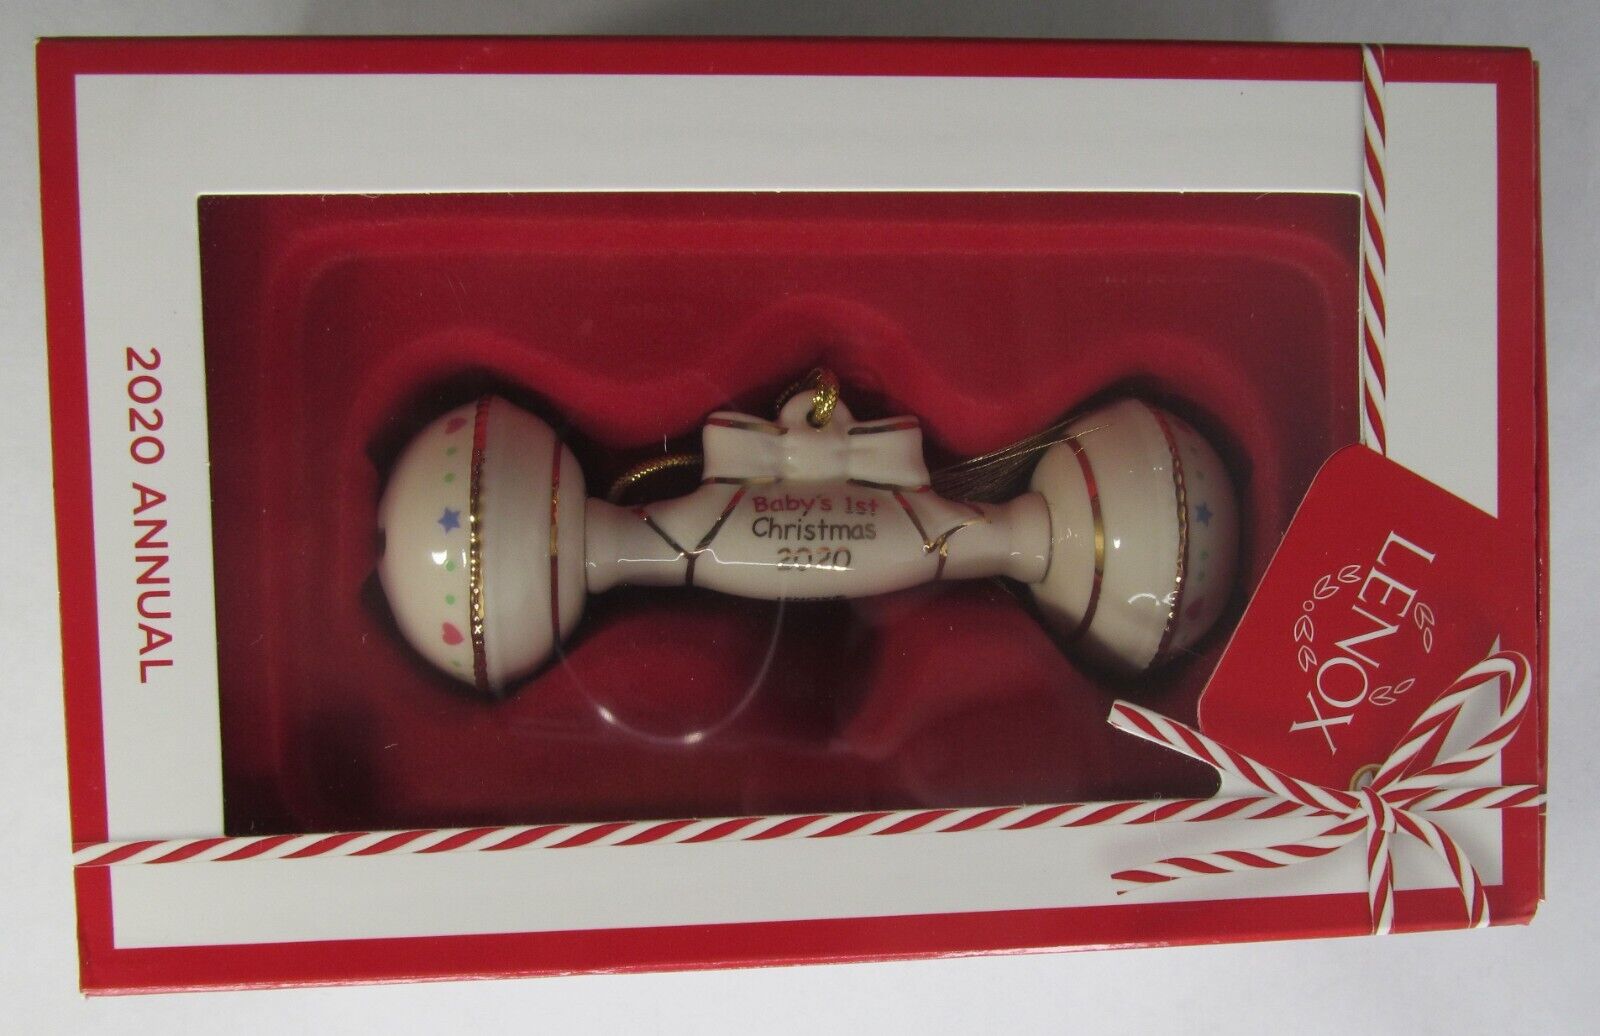 NEW LENOX 2020 ANUAL BABY'S 1ST FIRST CHRISTMAS RATTLE ORNAMENT 890072